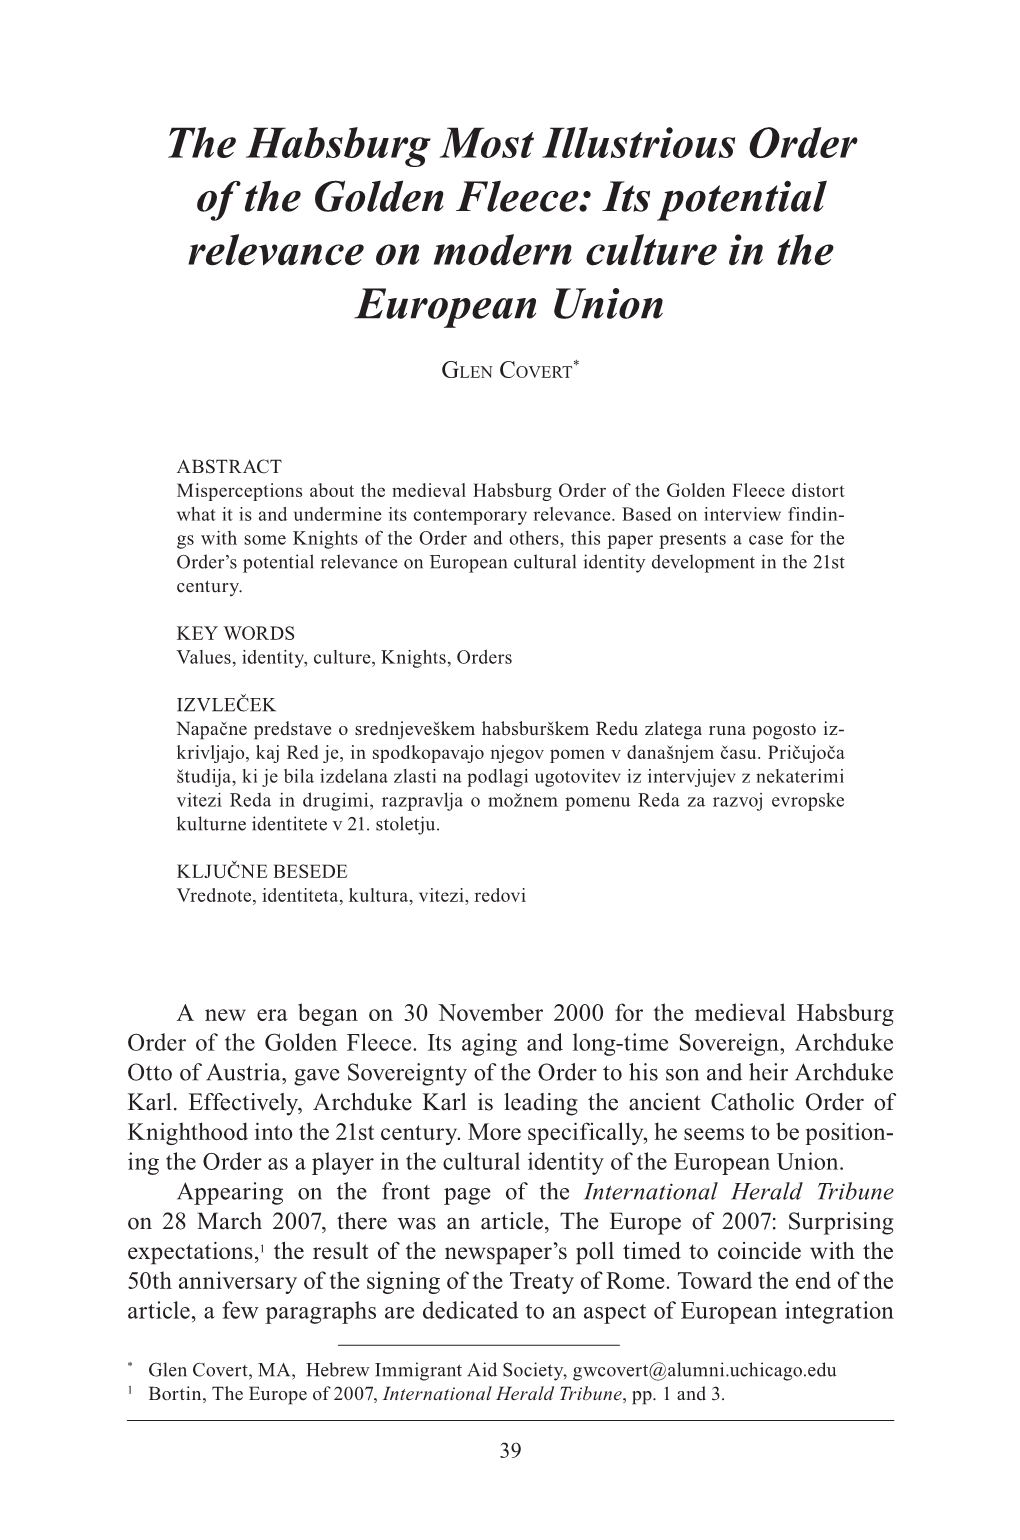 The Habsburg Most Illustrious Order of the Golden Fleece: Its Potential Relevance on Modern Culture in the European Union